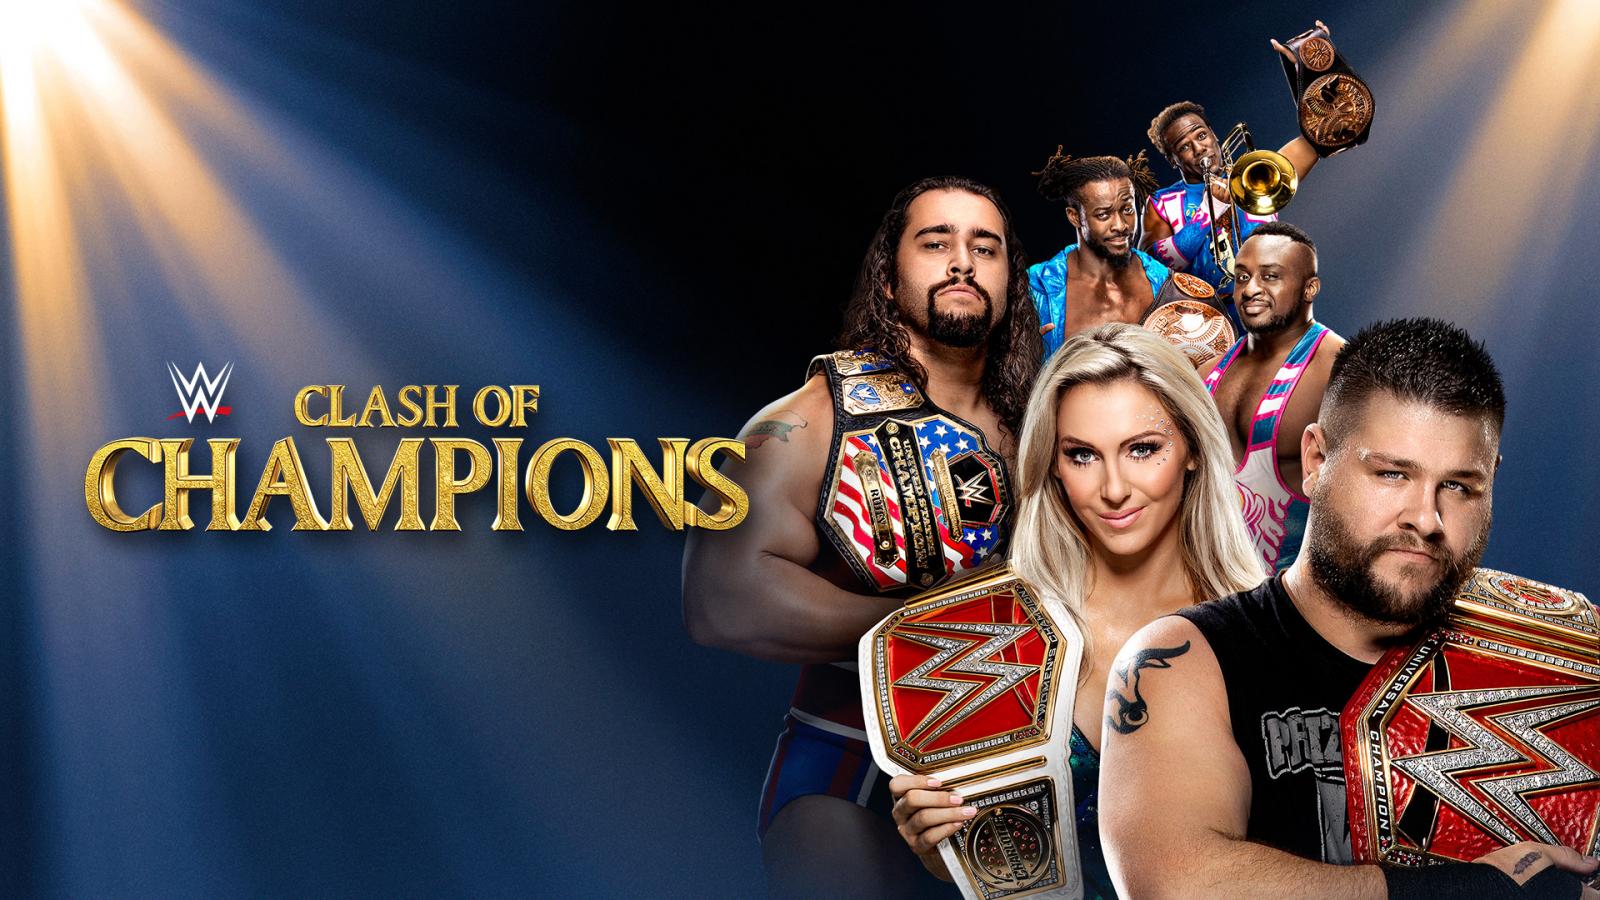 WWE Clash Of Champions This Sunday! Major Highlights